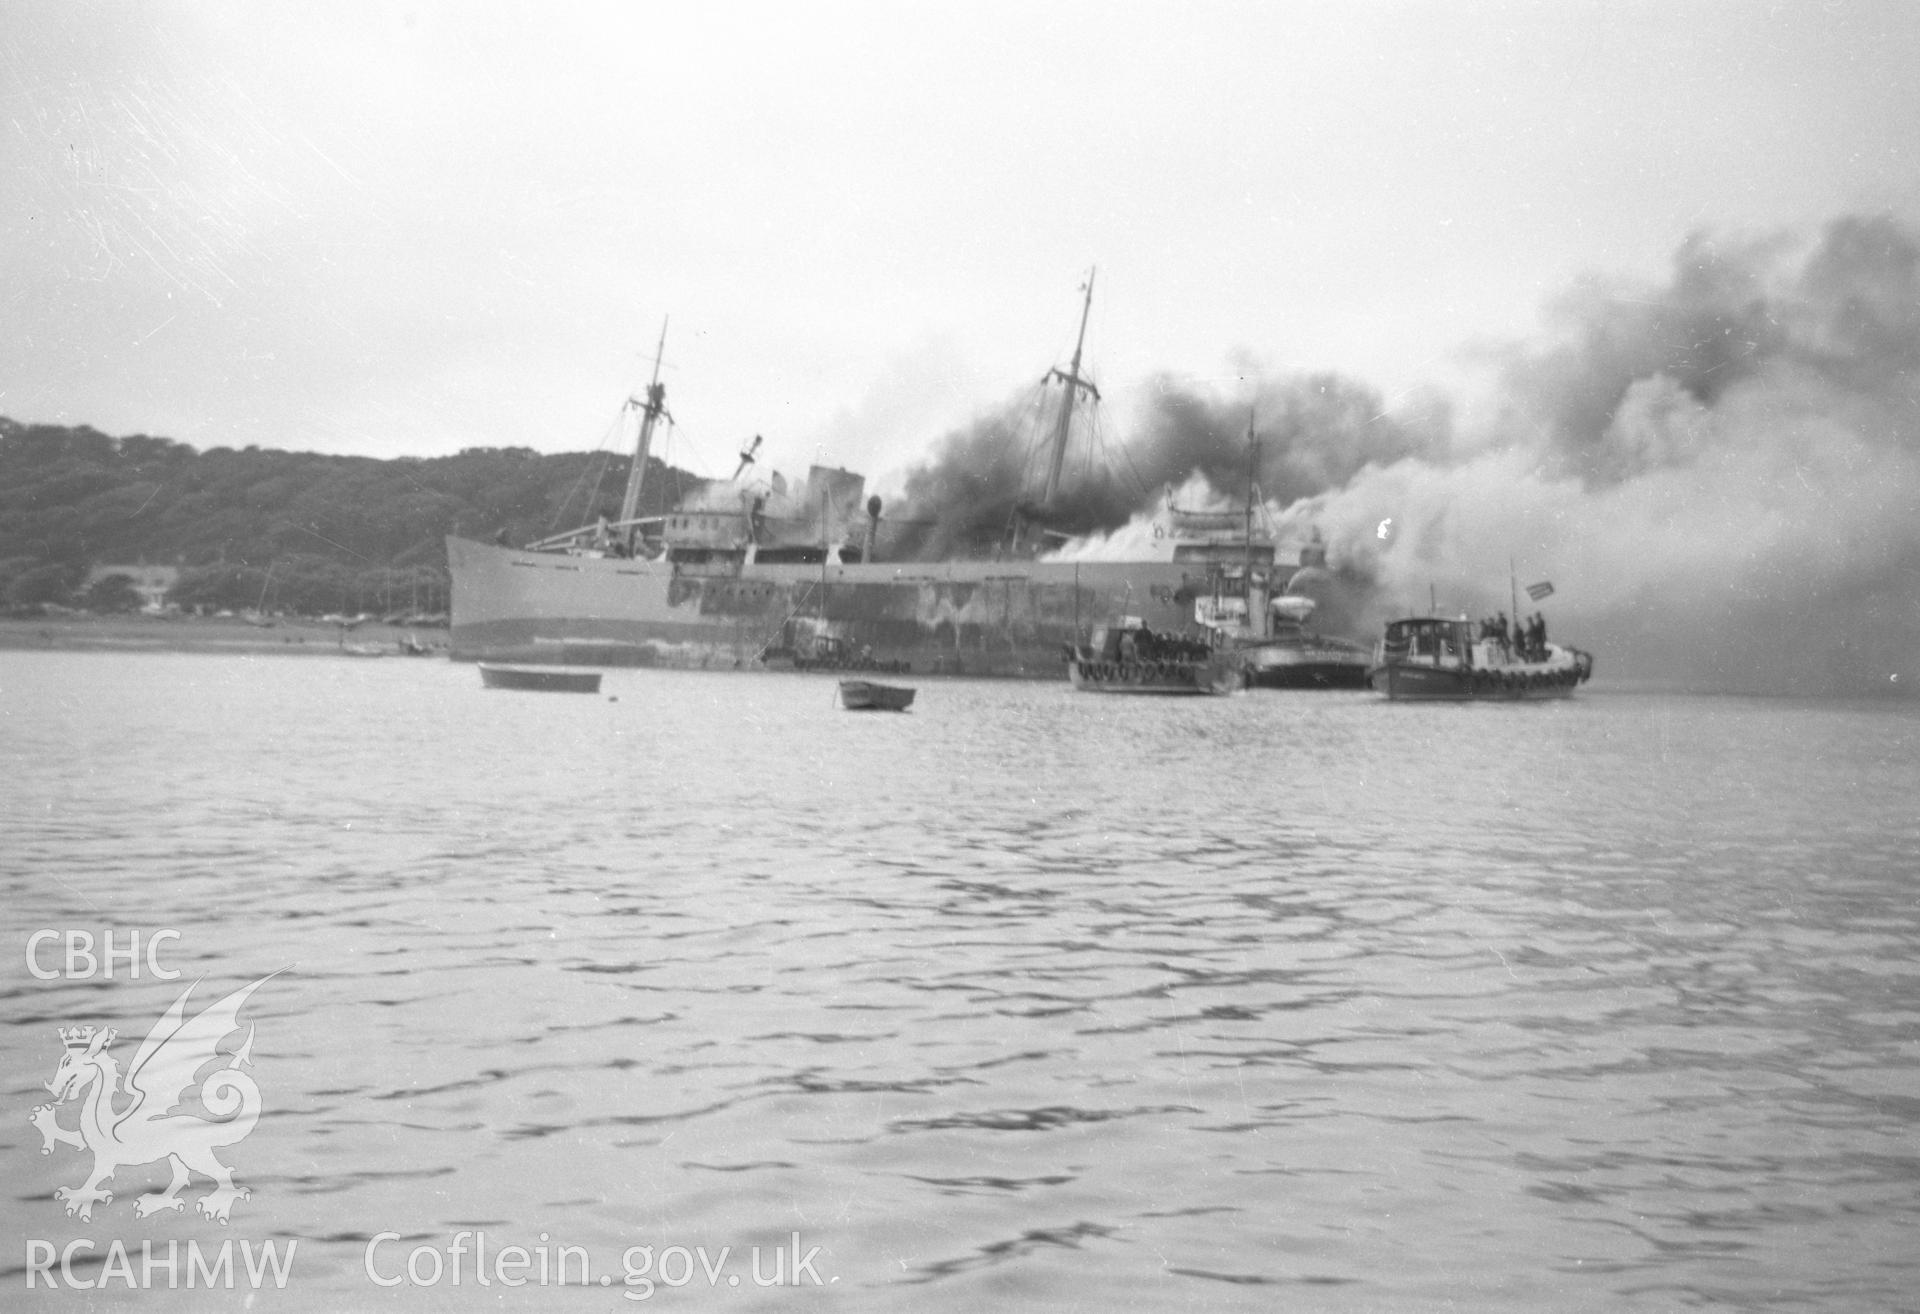 View showing SS Etrog in flames, taken from the shore at Dale.